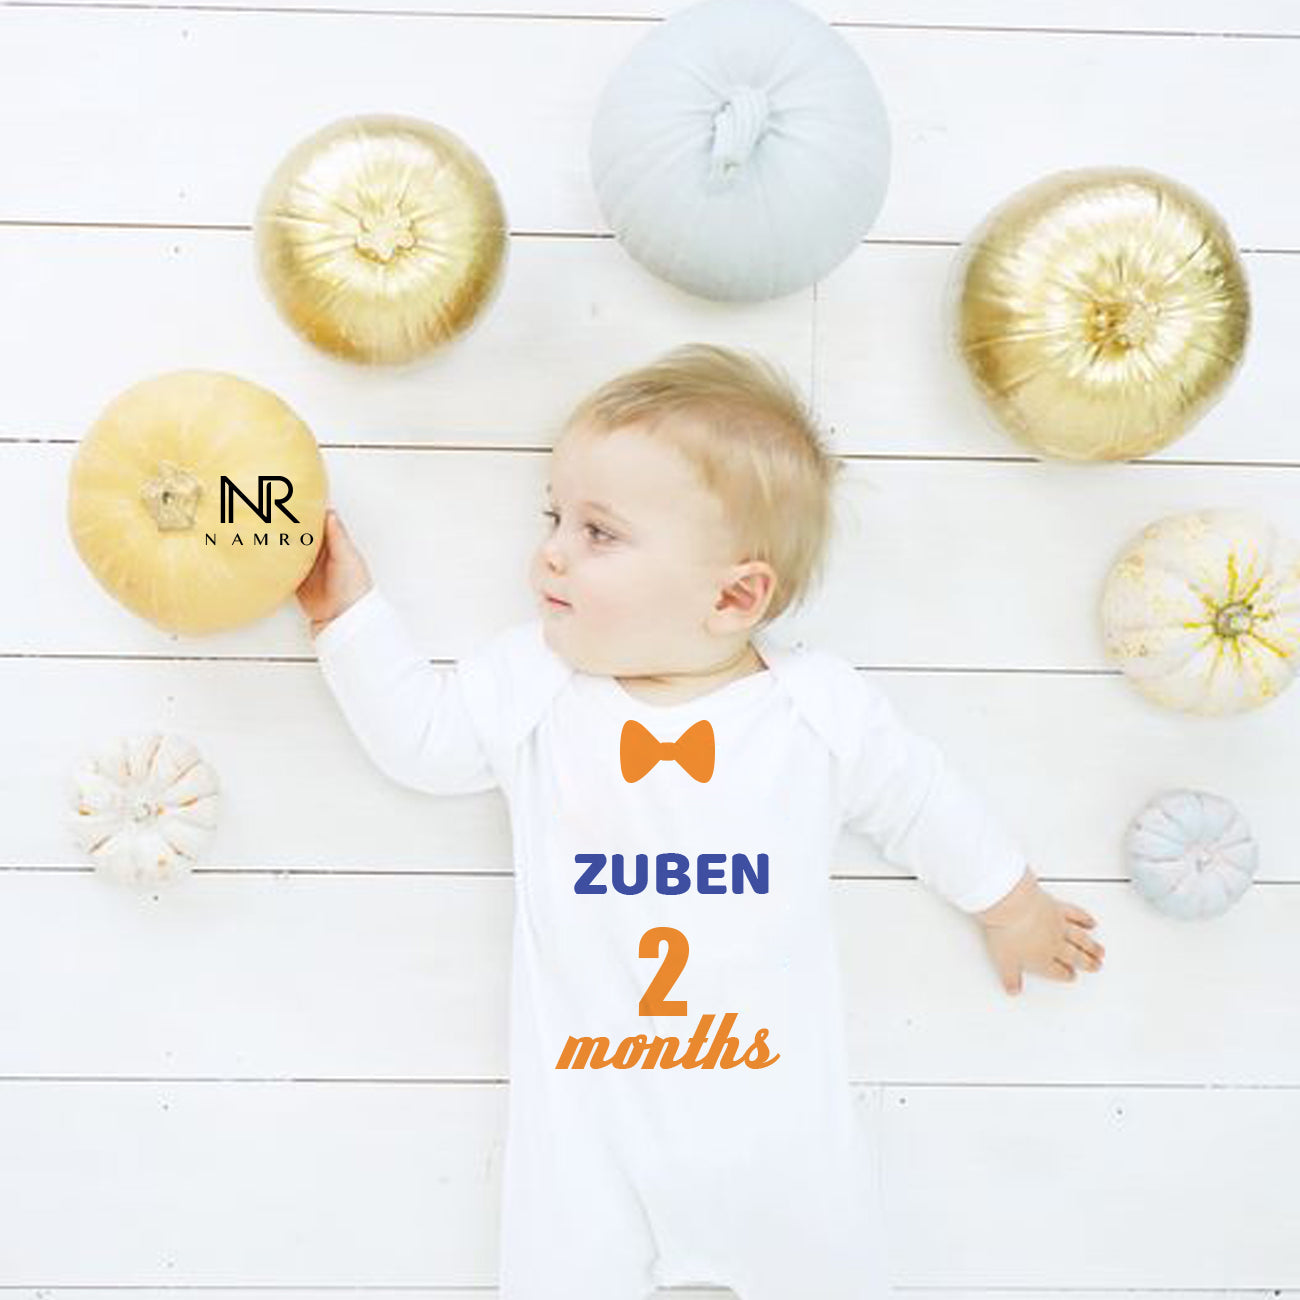 Zuben is 2 MONTHS (Customise baby's name)